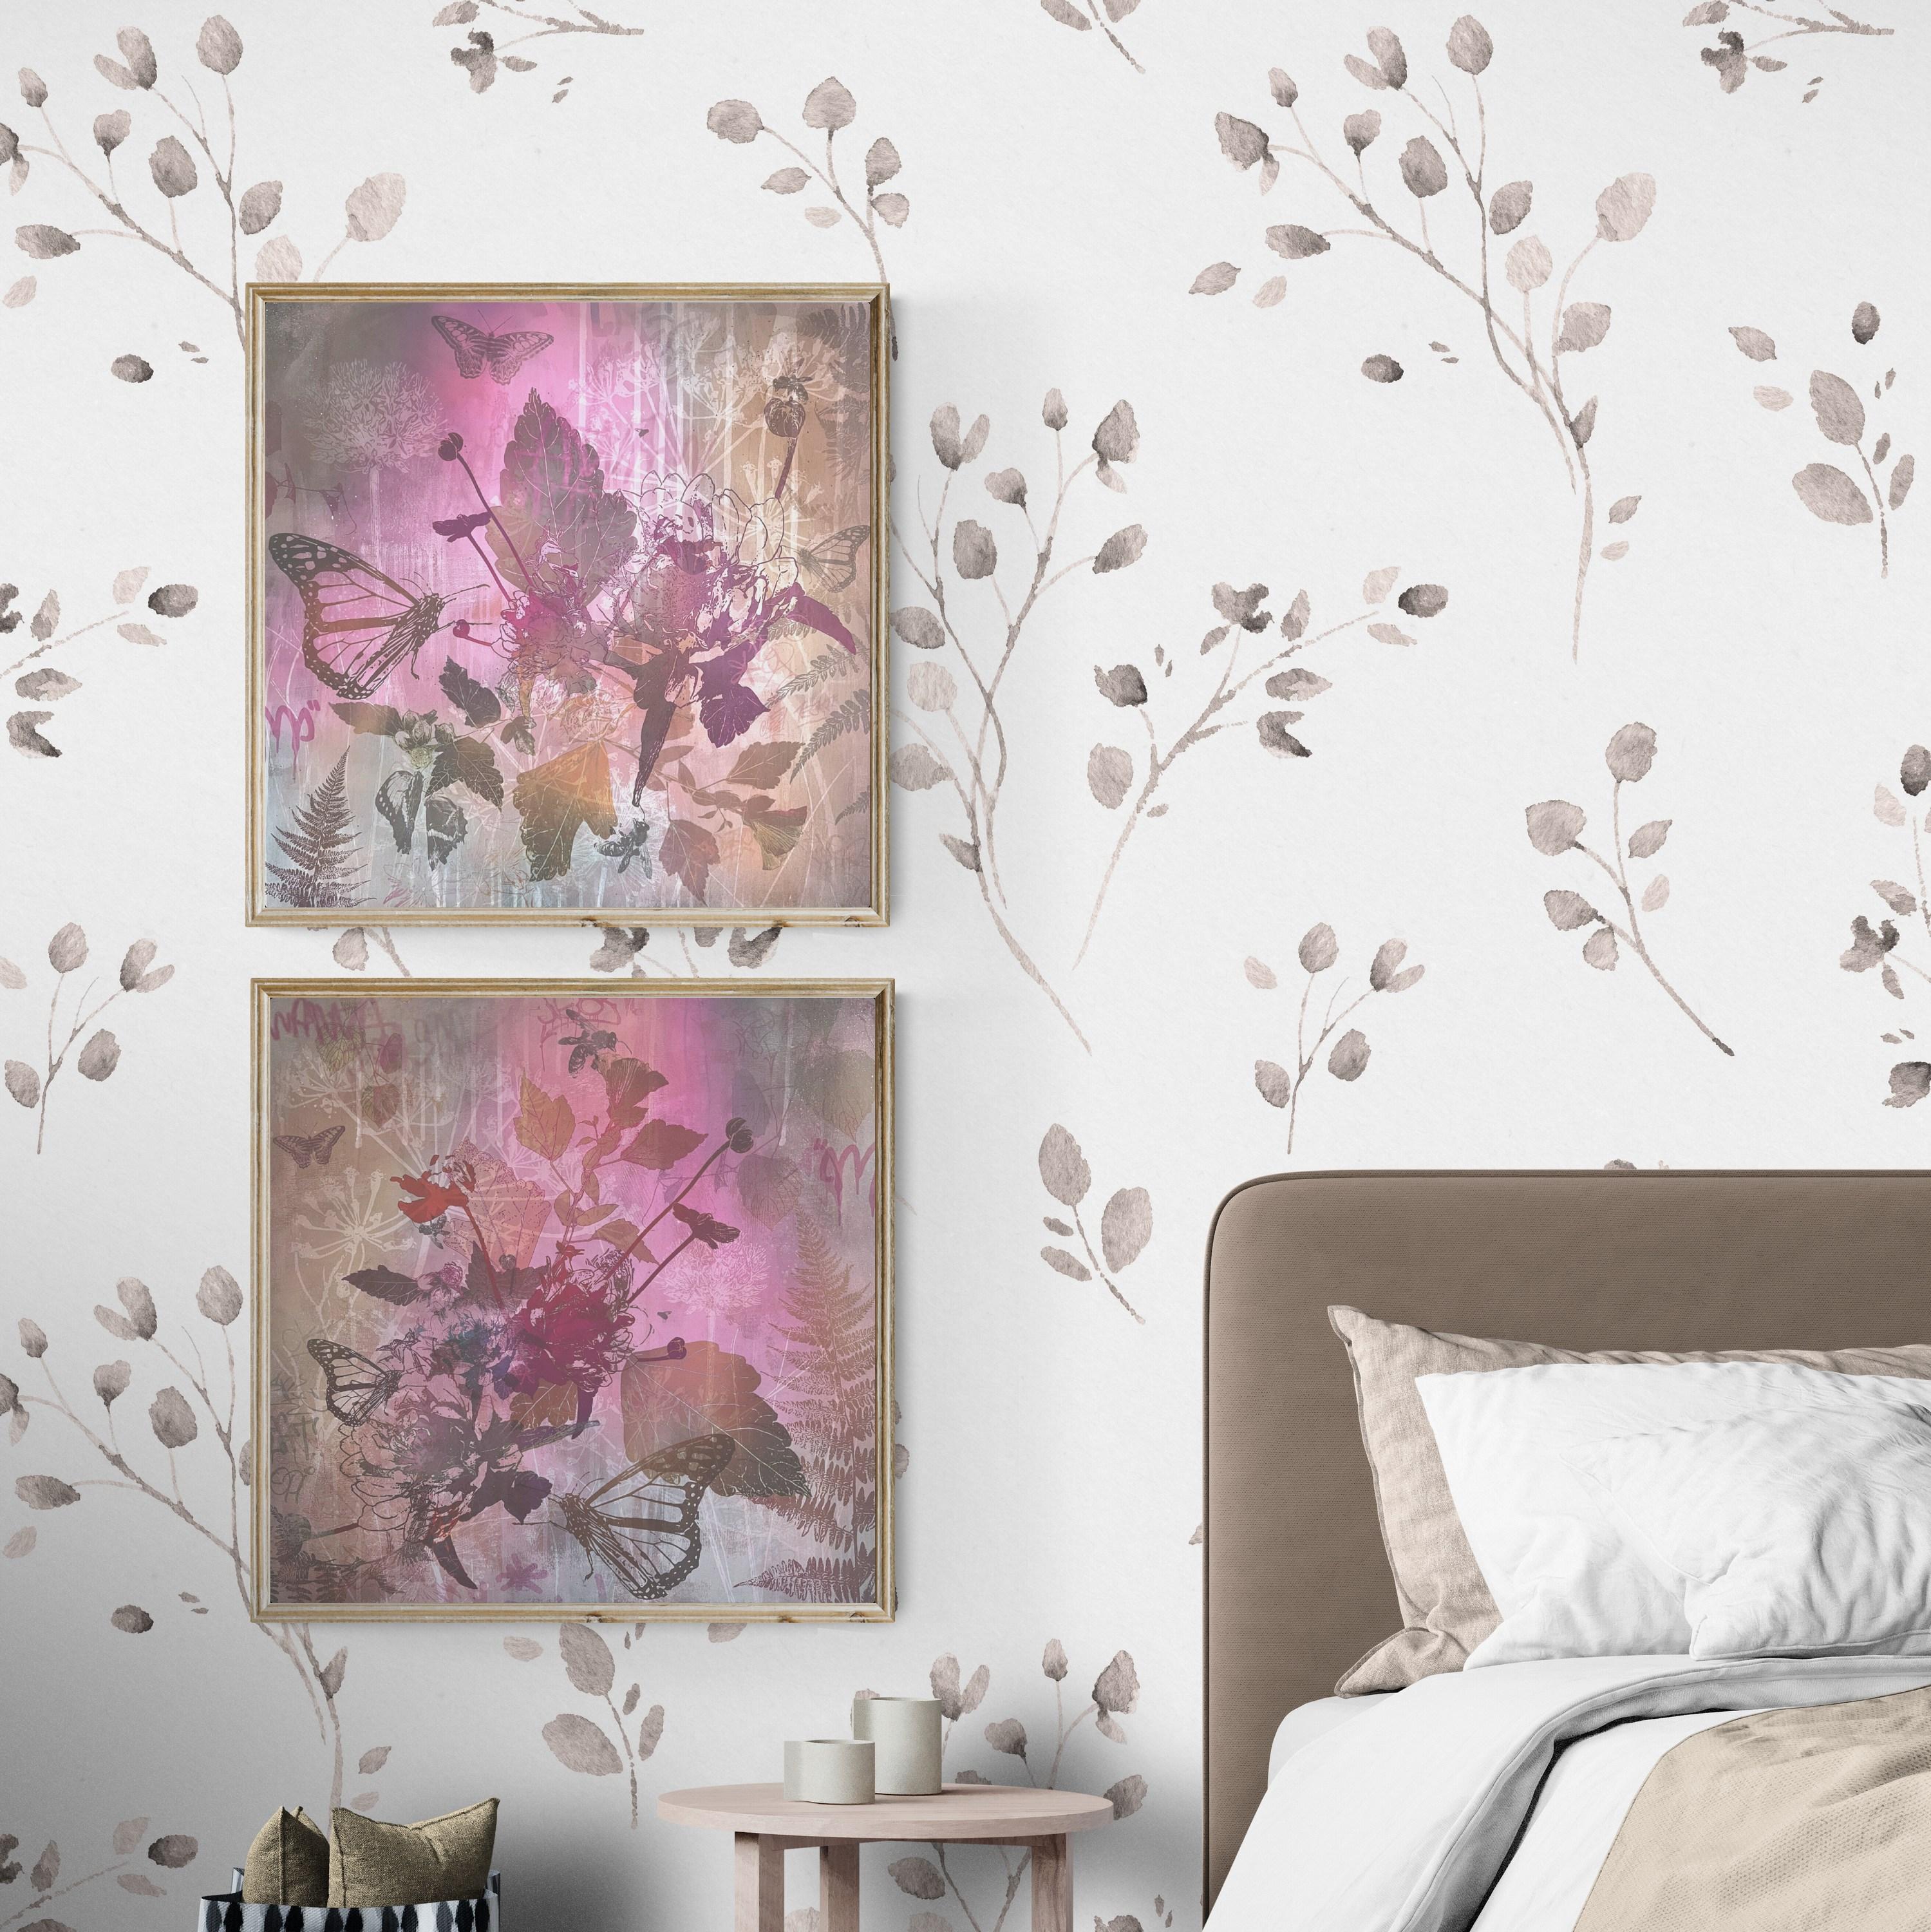 Morning Glory Diptych (Bees, Birch Panel, Botanicals, Butterflies, Floral, Gold) - Contemporary Painting by Katrina Revenaugh